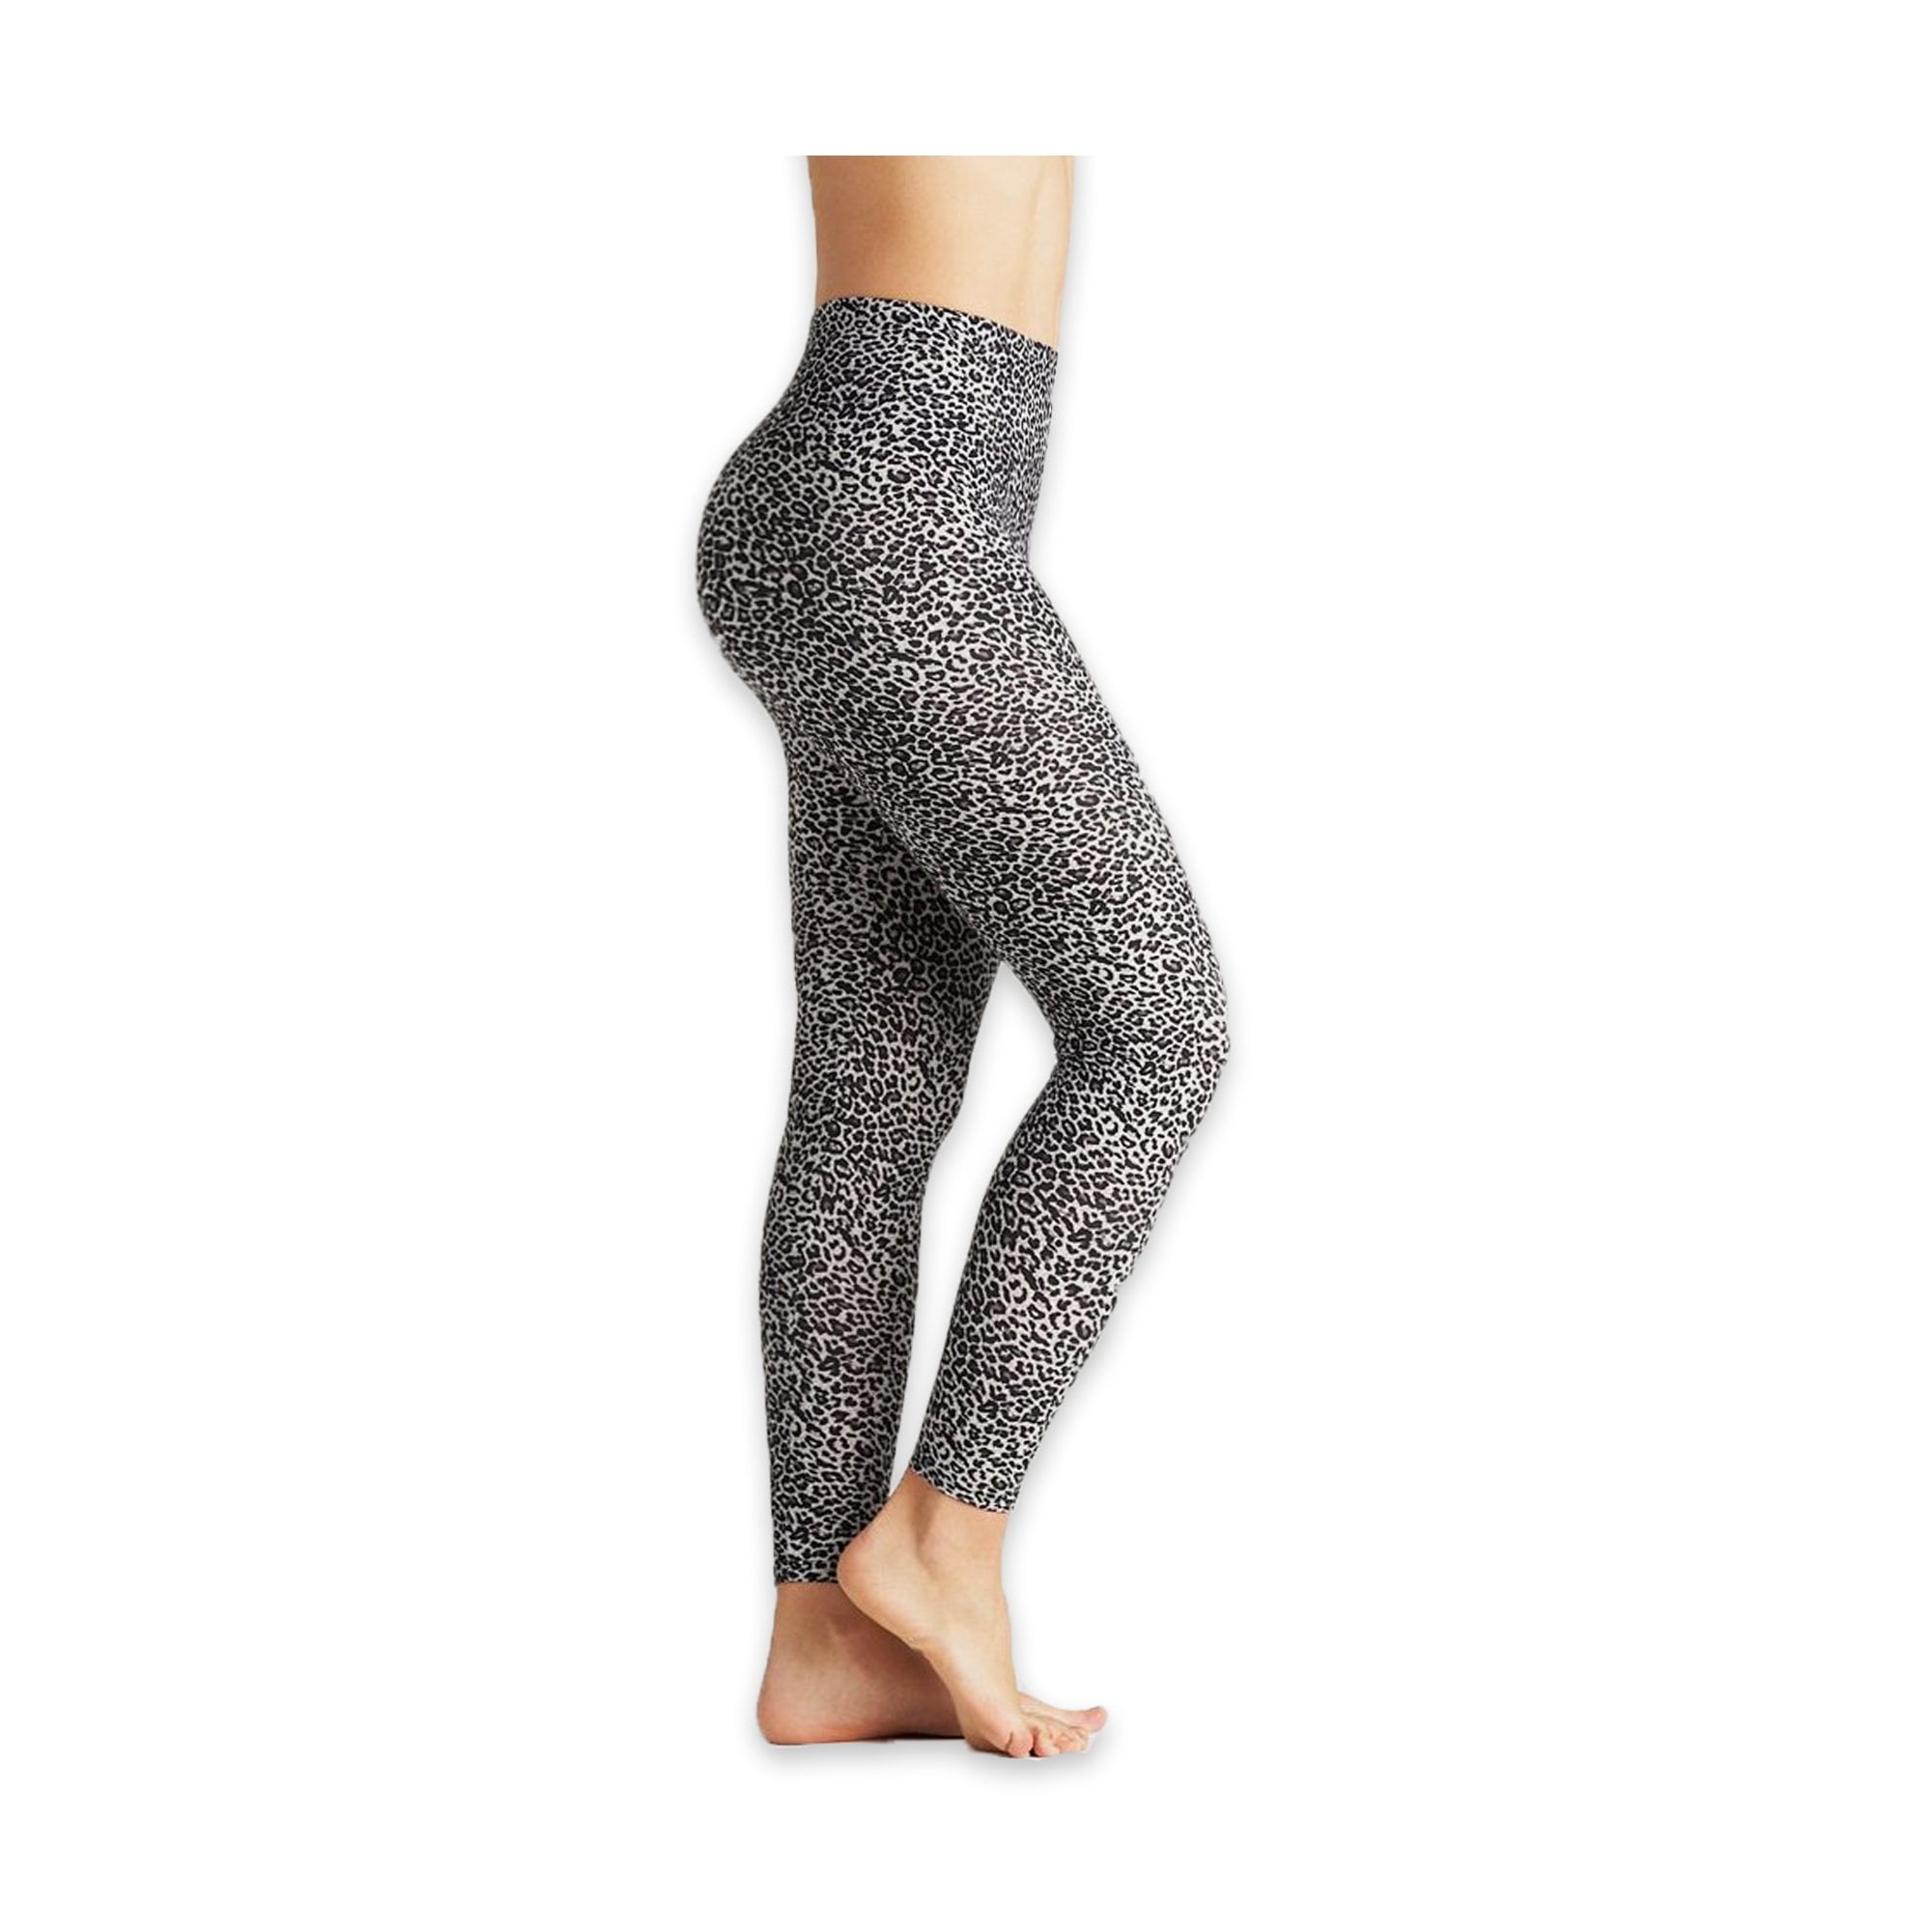 Walmart: Super Soft Holiday Leggings Only $5.88 (In-Store Only)